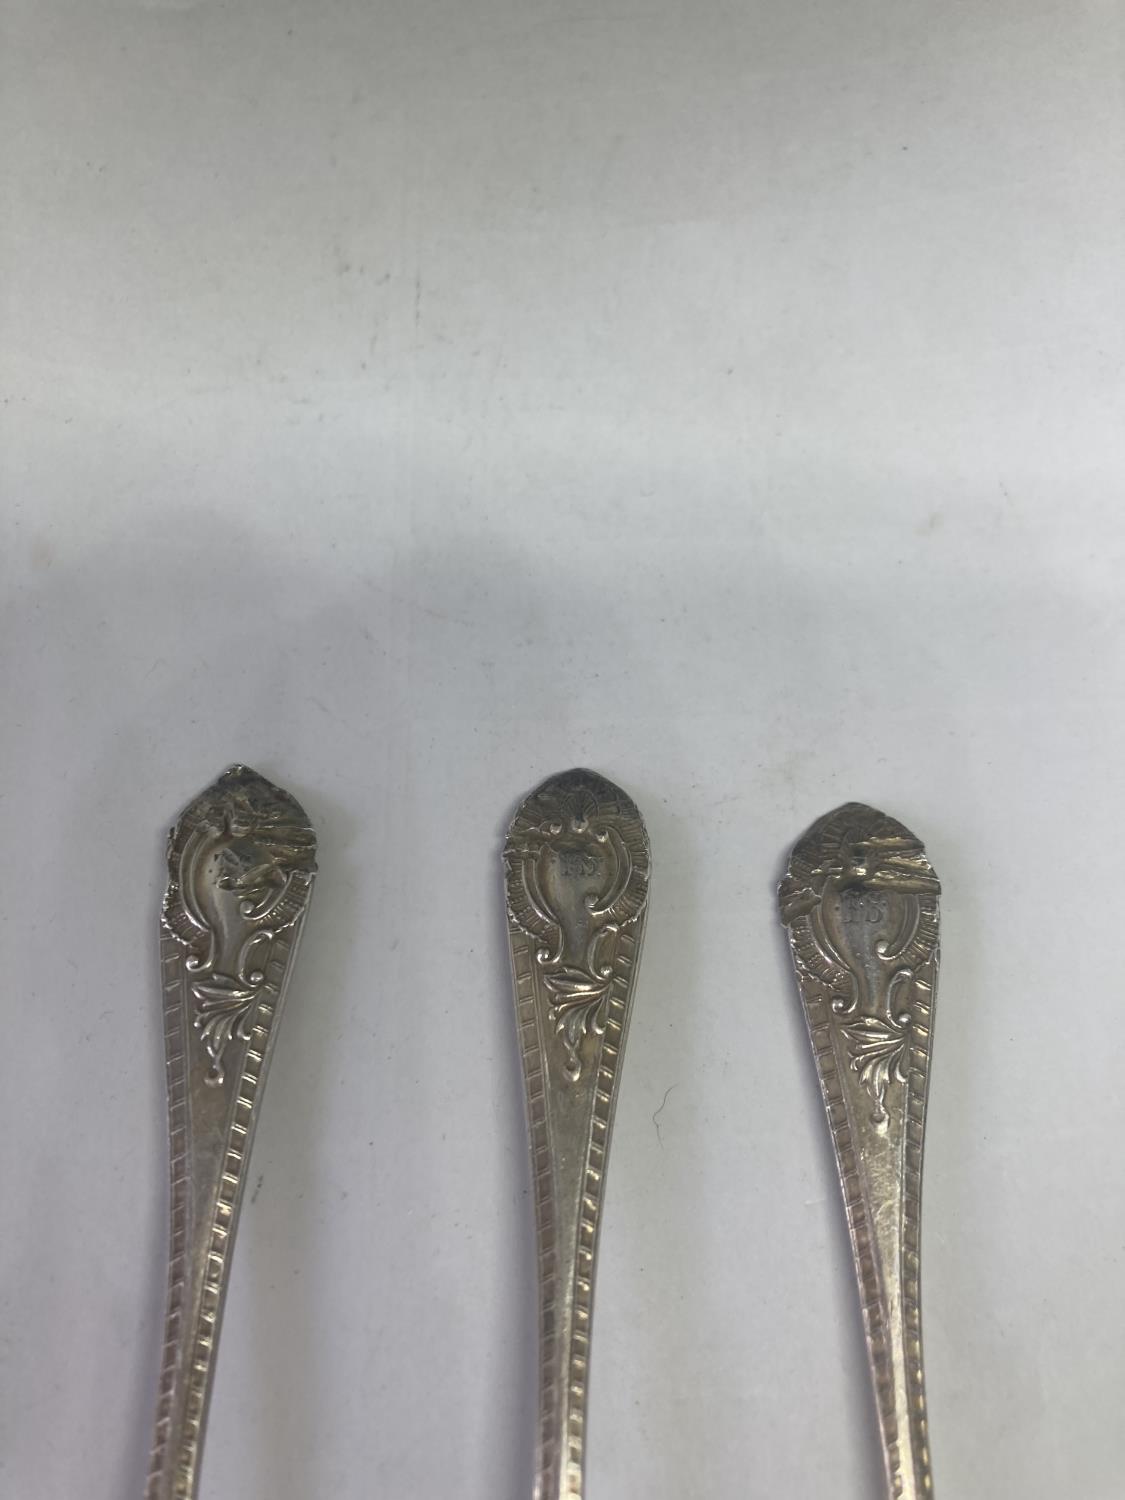 THREE HALLMARKED SHEFFILED SILVER TEASPOONS GROSS WEIGHT 75.65 GRAMS - Image 3 of 6